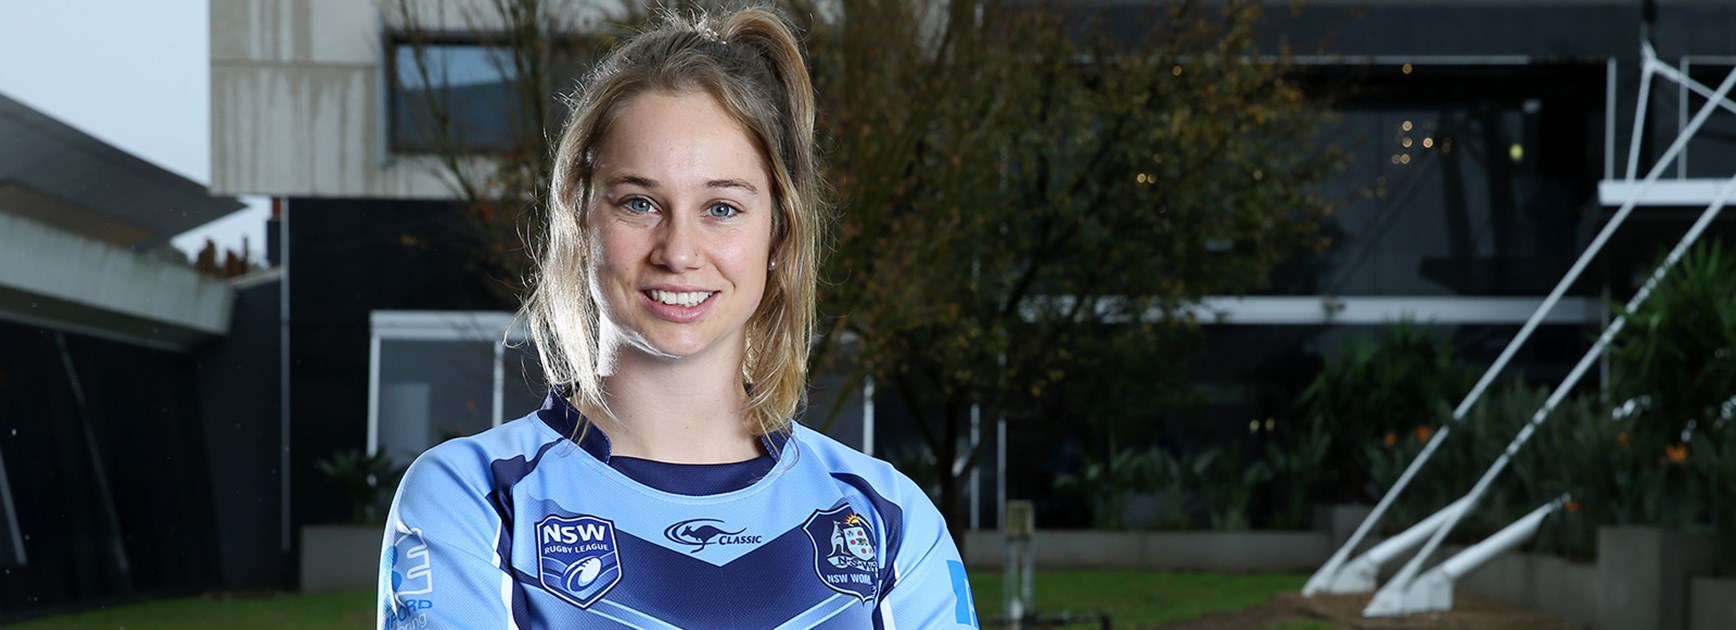 Kezie Apps in NSW camp ready to take on Queensland this Saturday at Cbus Super Stadium.